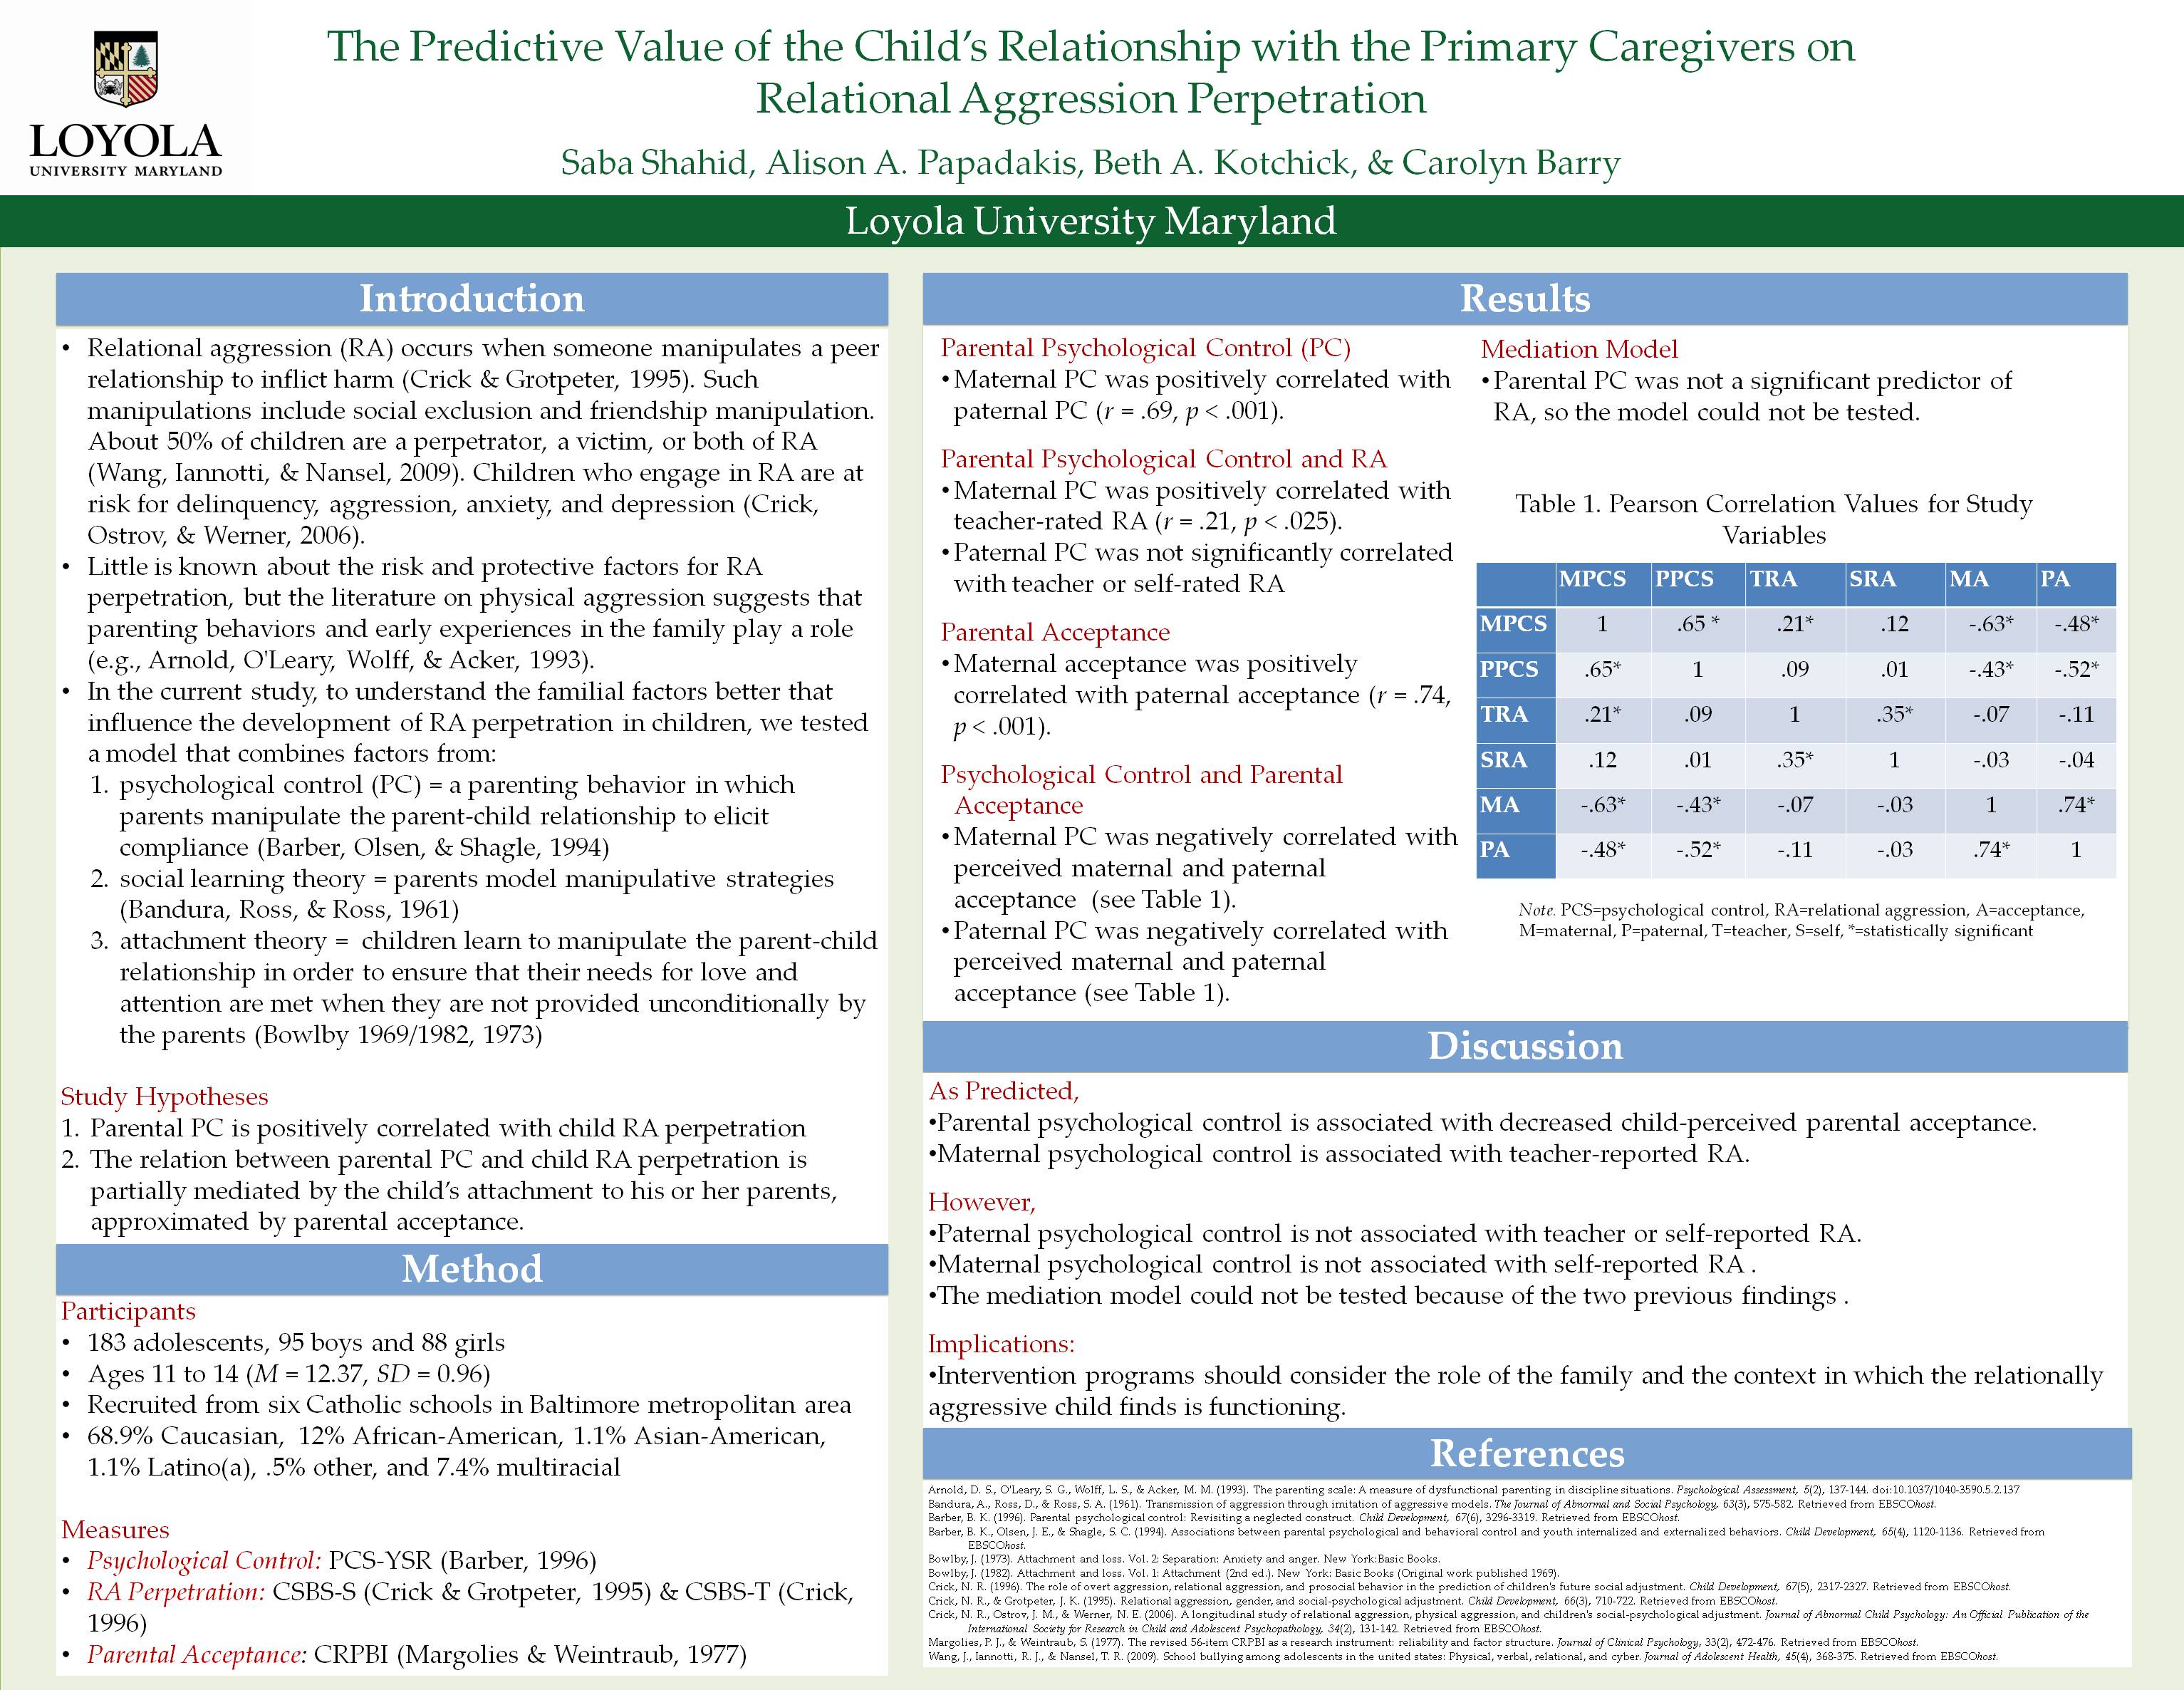 Poster image: The Predictive Value of the Child’s Relationship with the Primary Caregivers on Relational Aggression Perpetration in the Peer Context